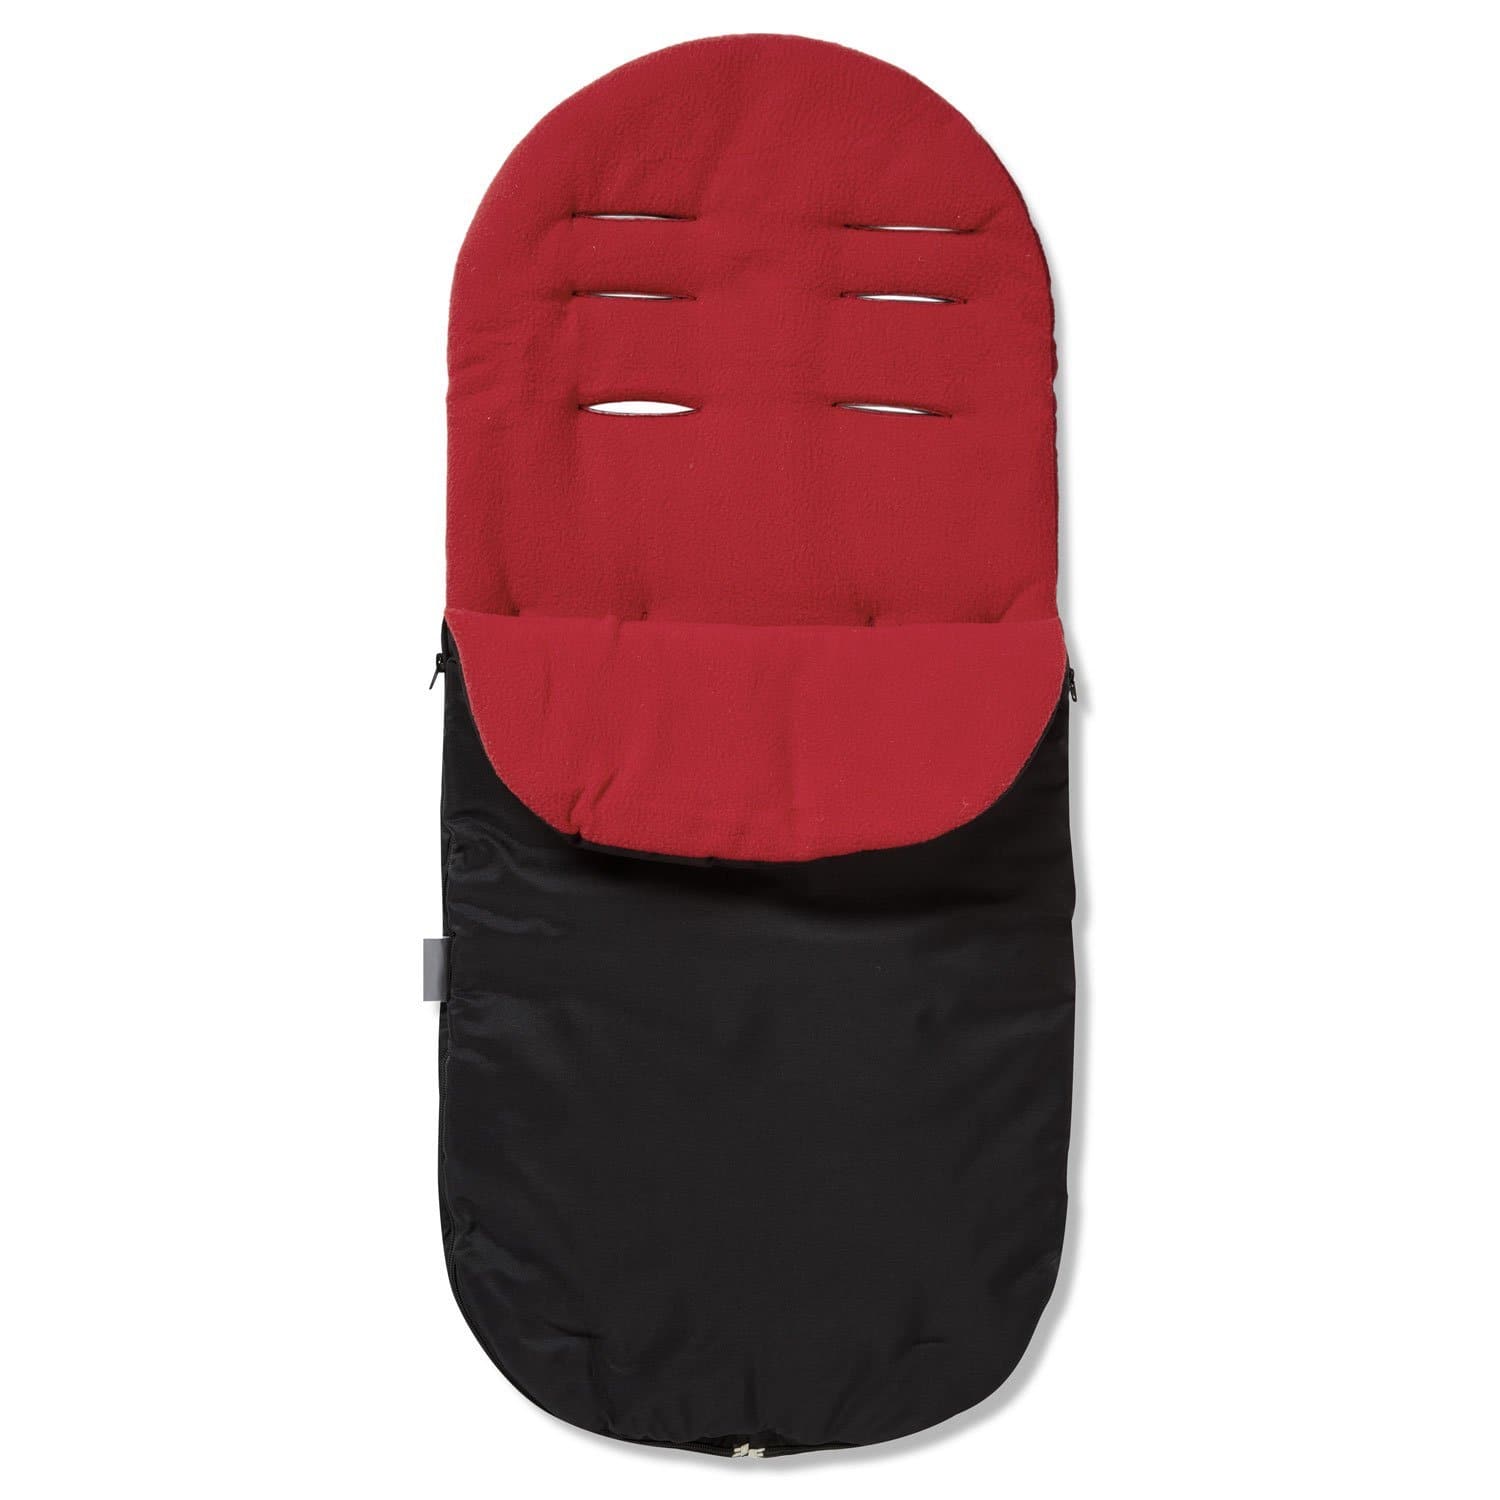 Footmuff / Cosy Toes Compatible with BabySun - Red / Fits All Models | For Your Little One